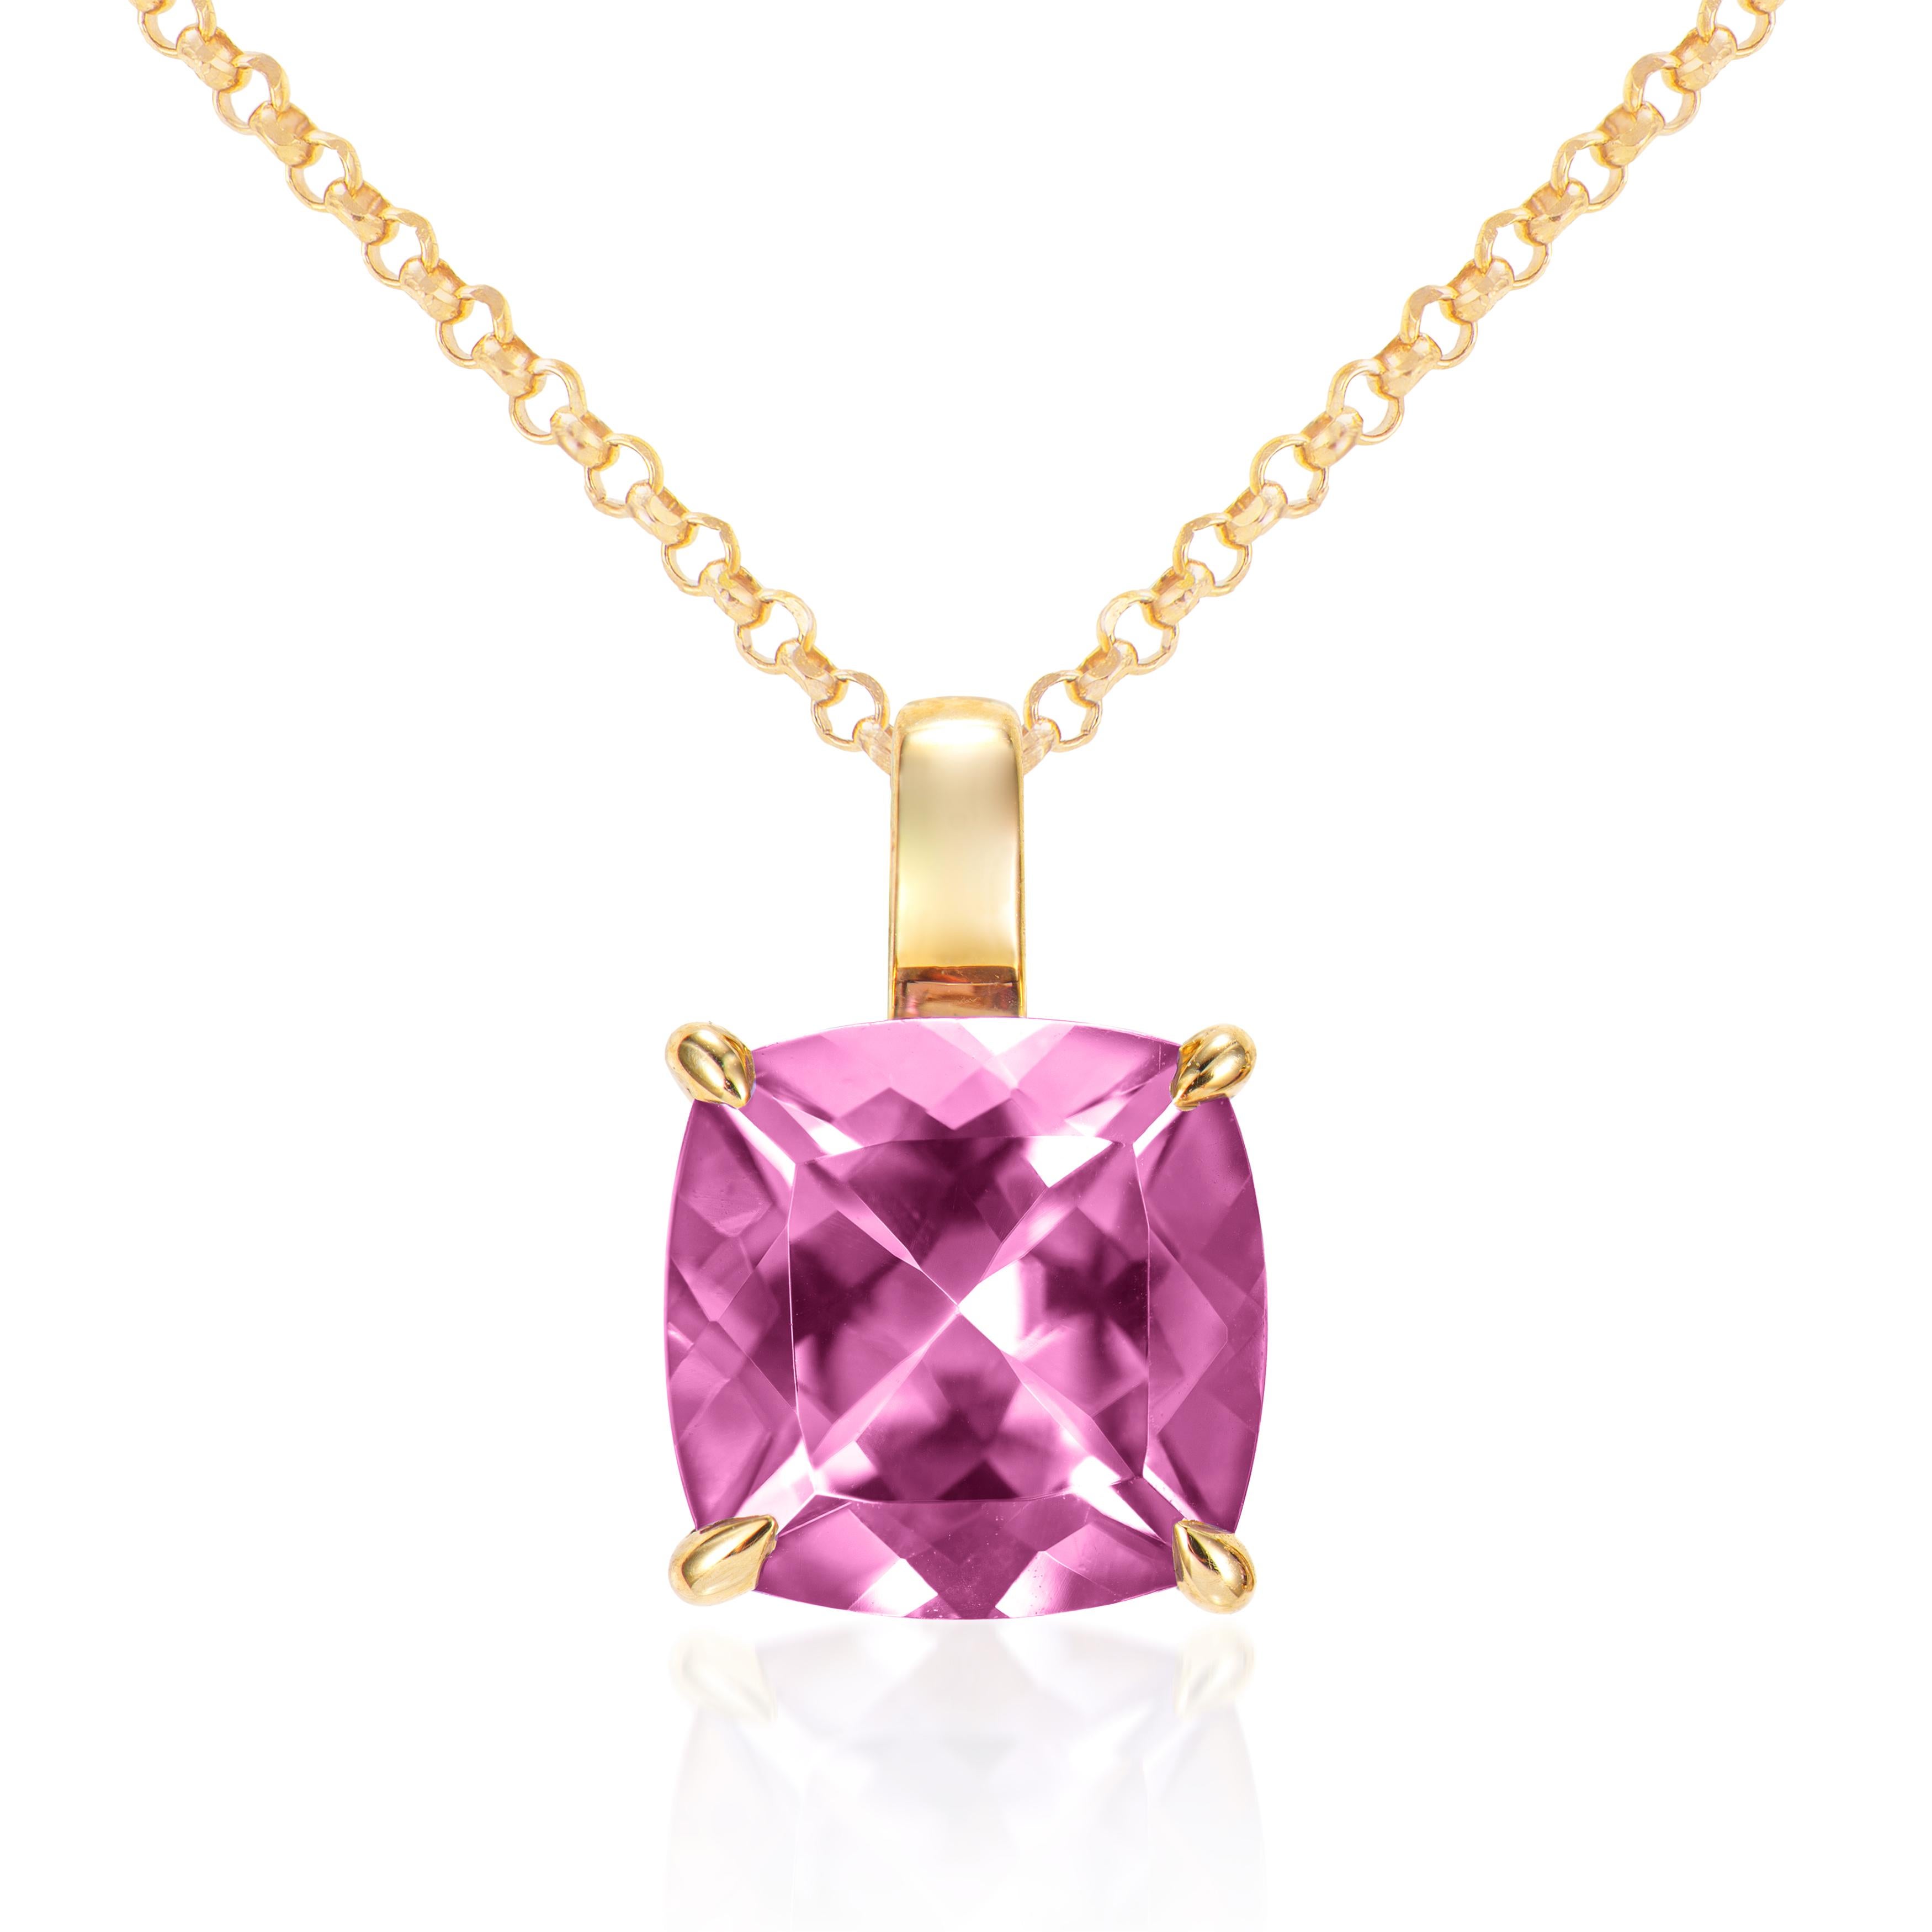 Presented A lovely collection of gems, including Rhodolite, Peridot, Amethyst, Sky Blue Topaz and Swiss Blue Topaz is perfect for people who value quality and want to wear it to any occasion or celebration. The yellow gold Rhodolite pendant offer a